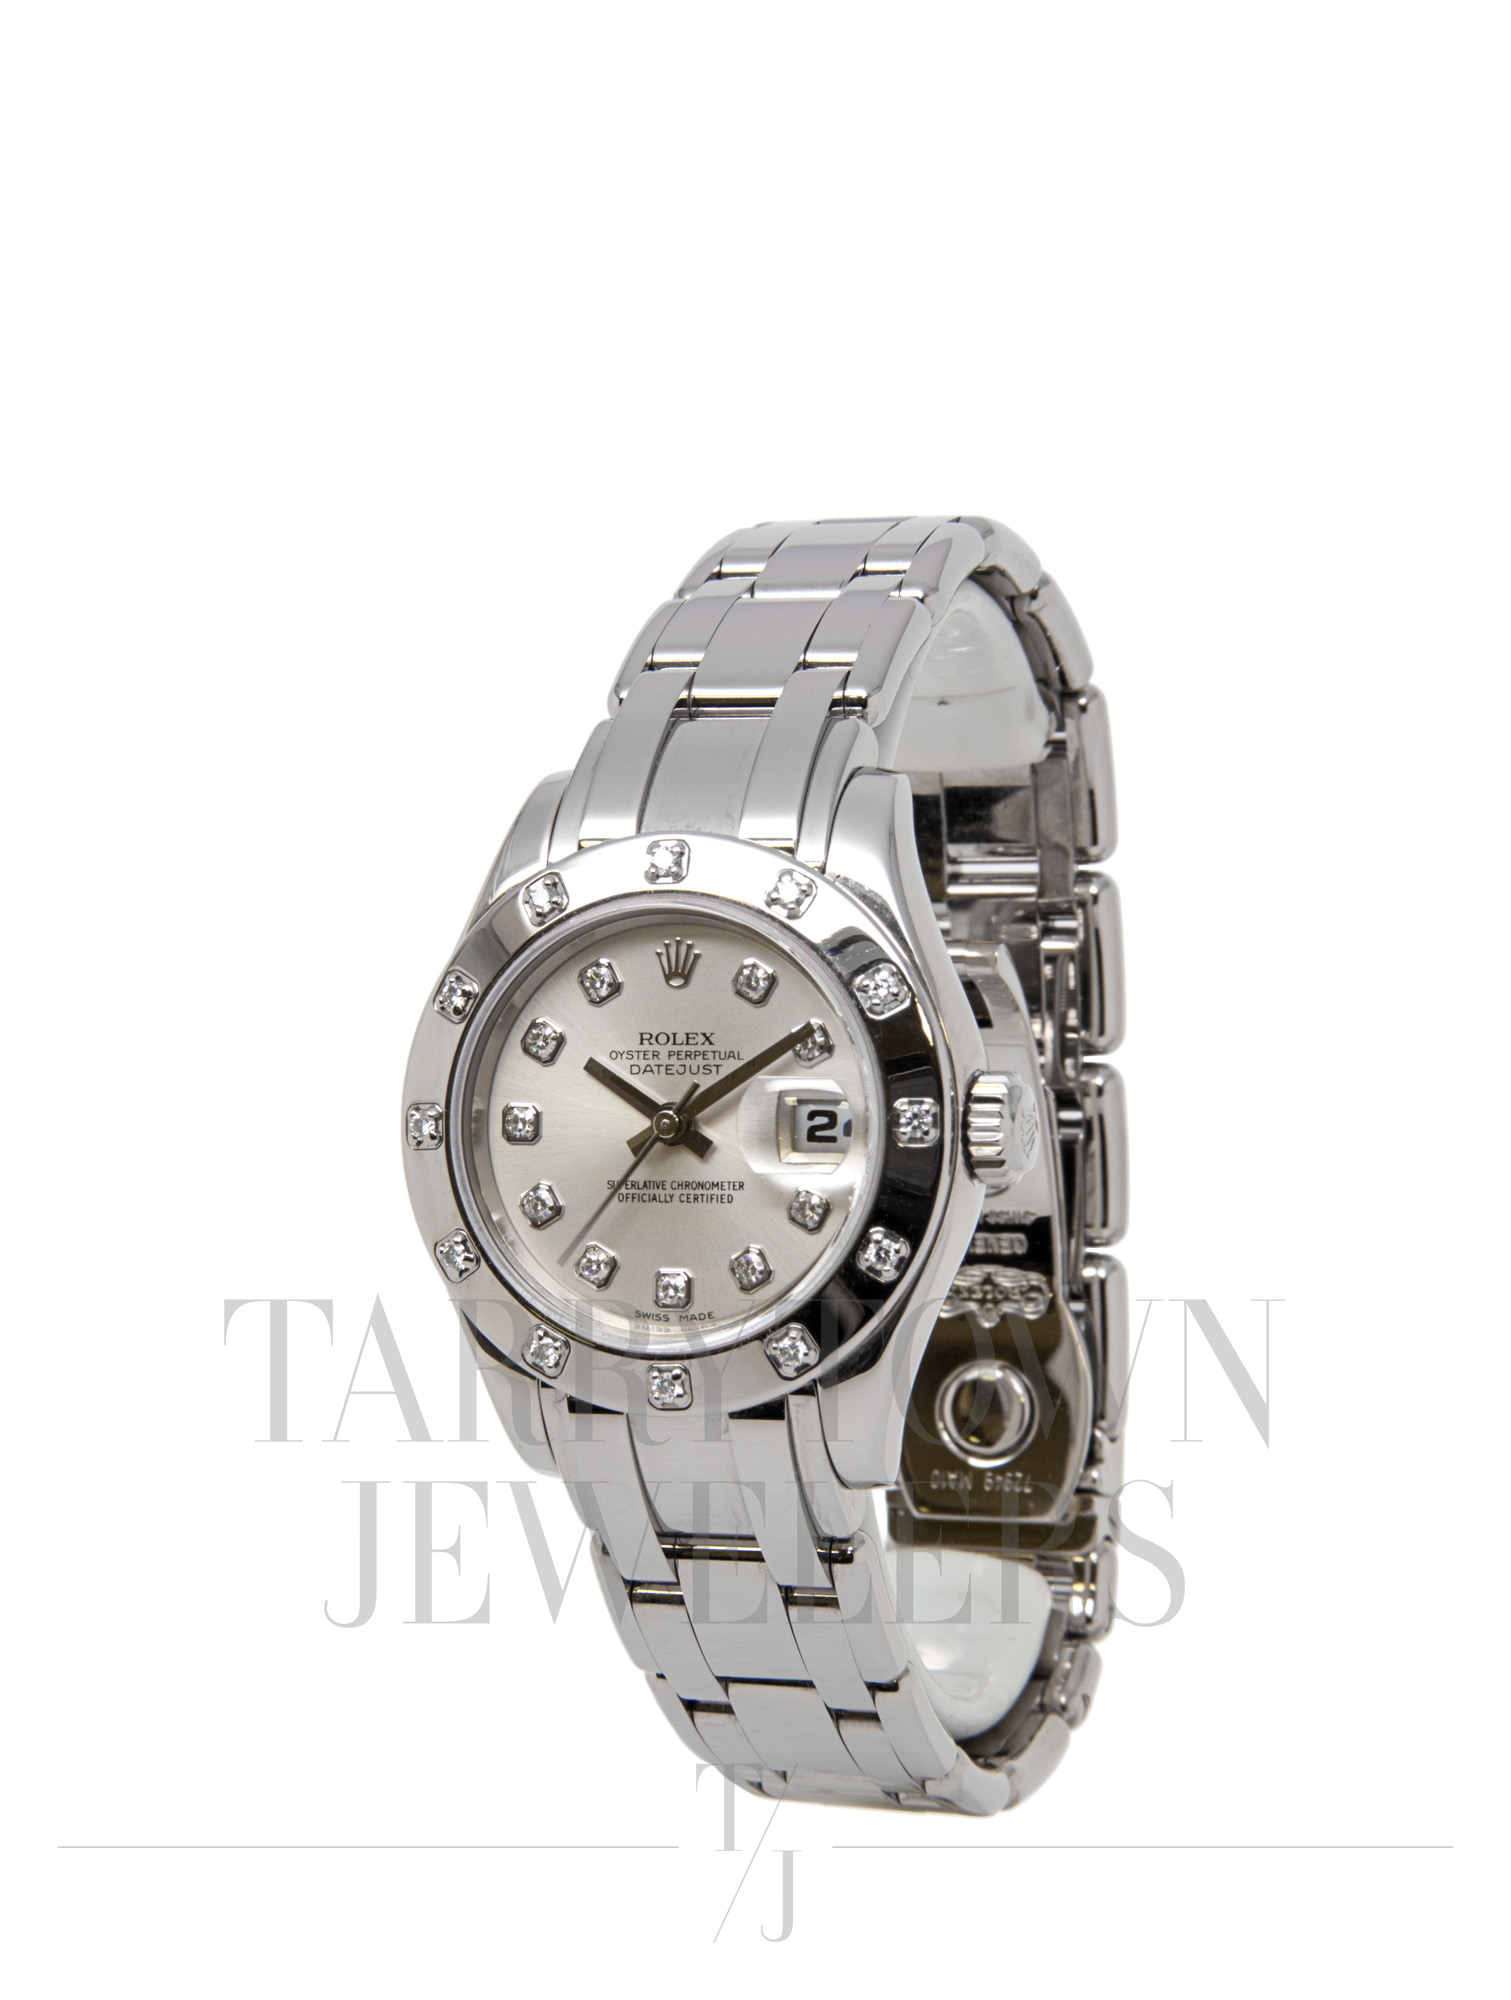 datejust pearlmaster